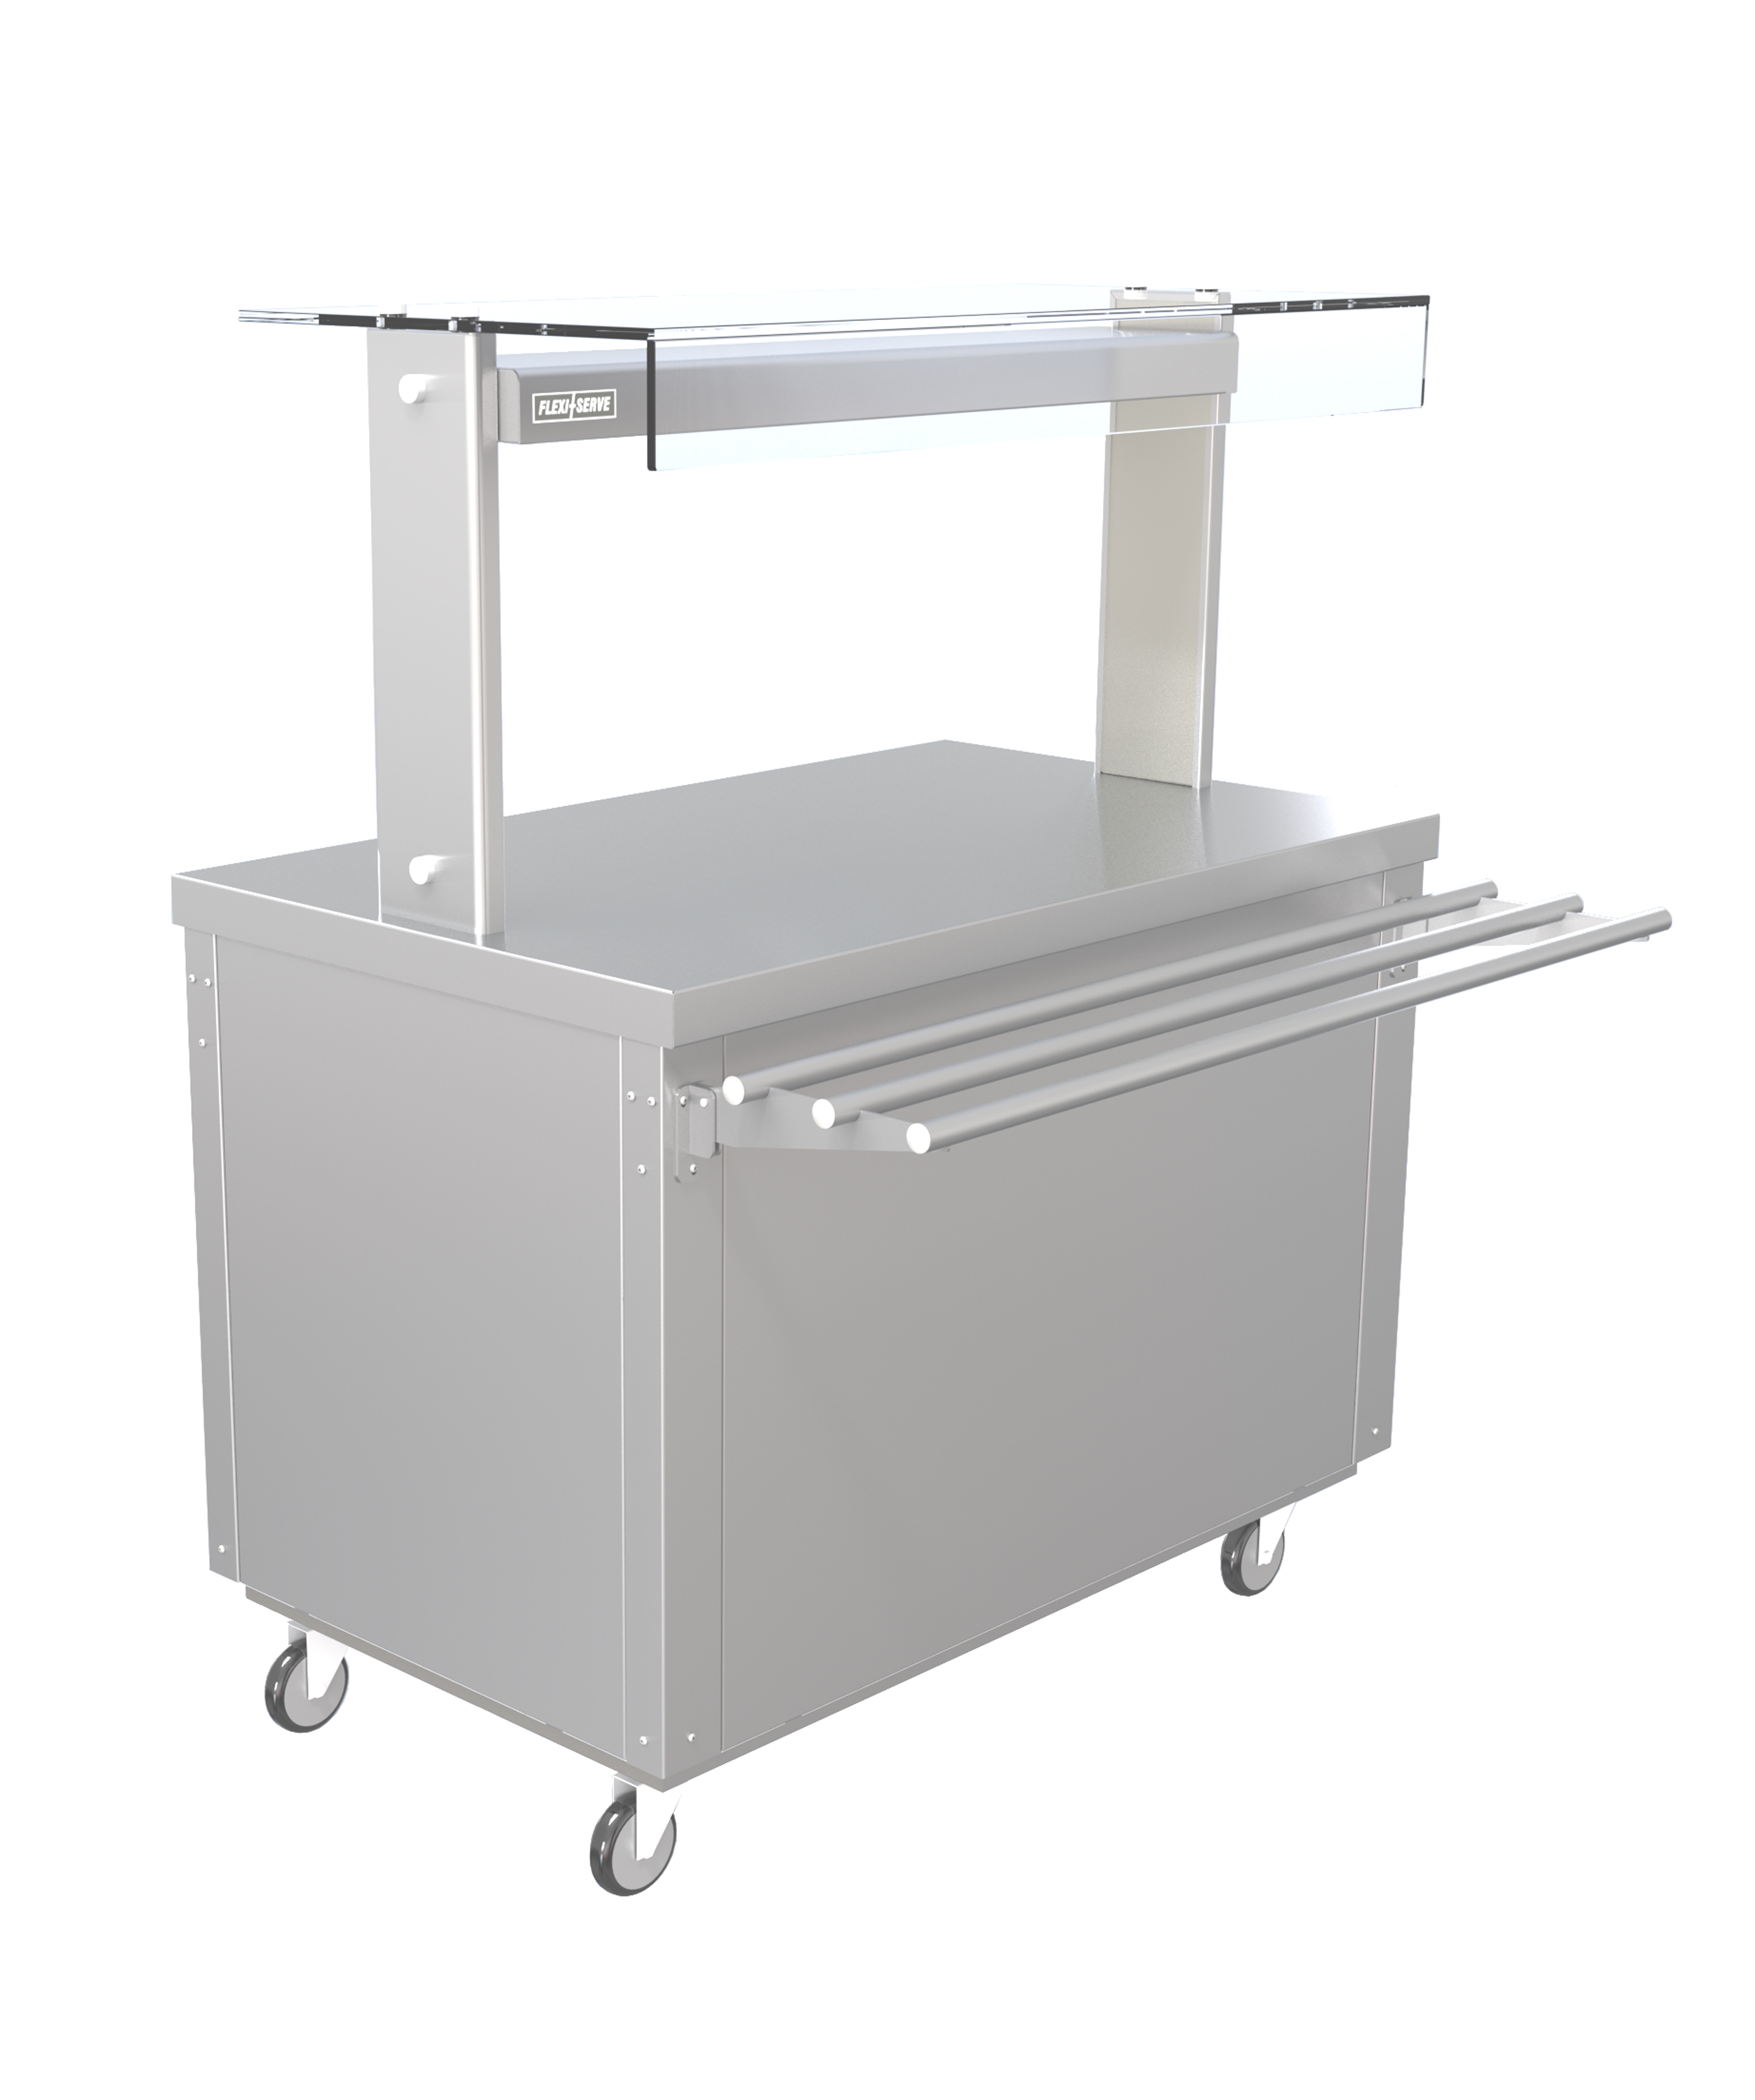 Parry FS-H3 - Flexi Serve Hort Cupboard with Plain Top and LED Illuminated Gantry